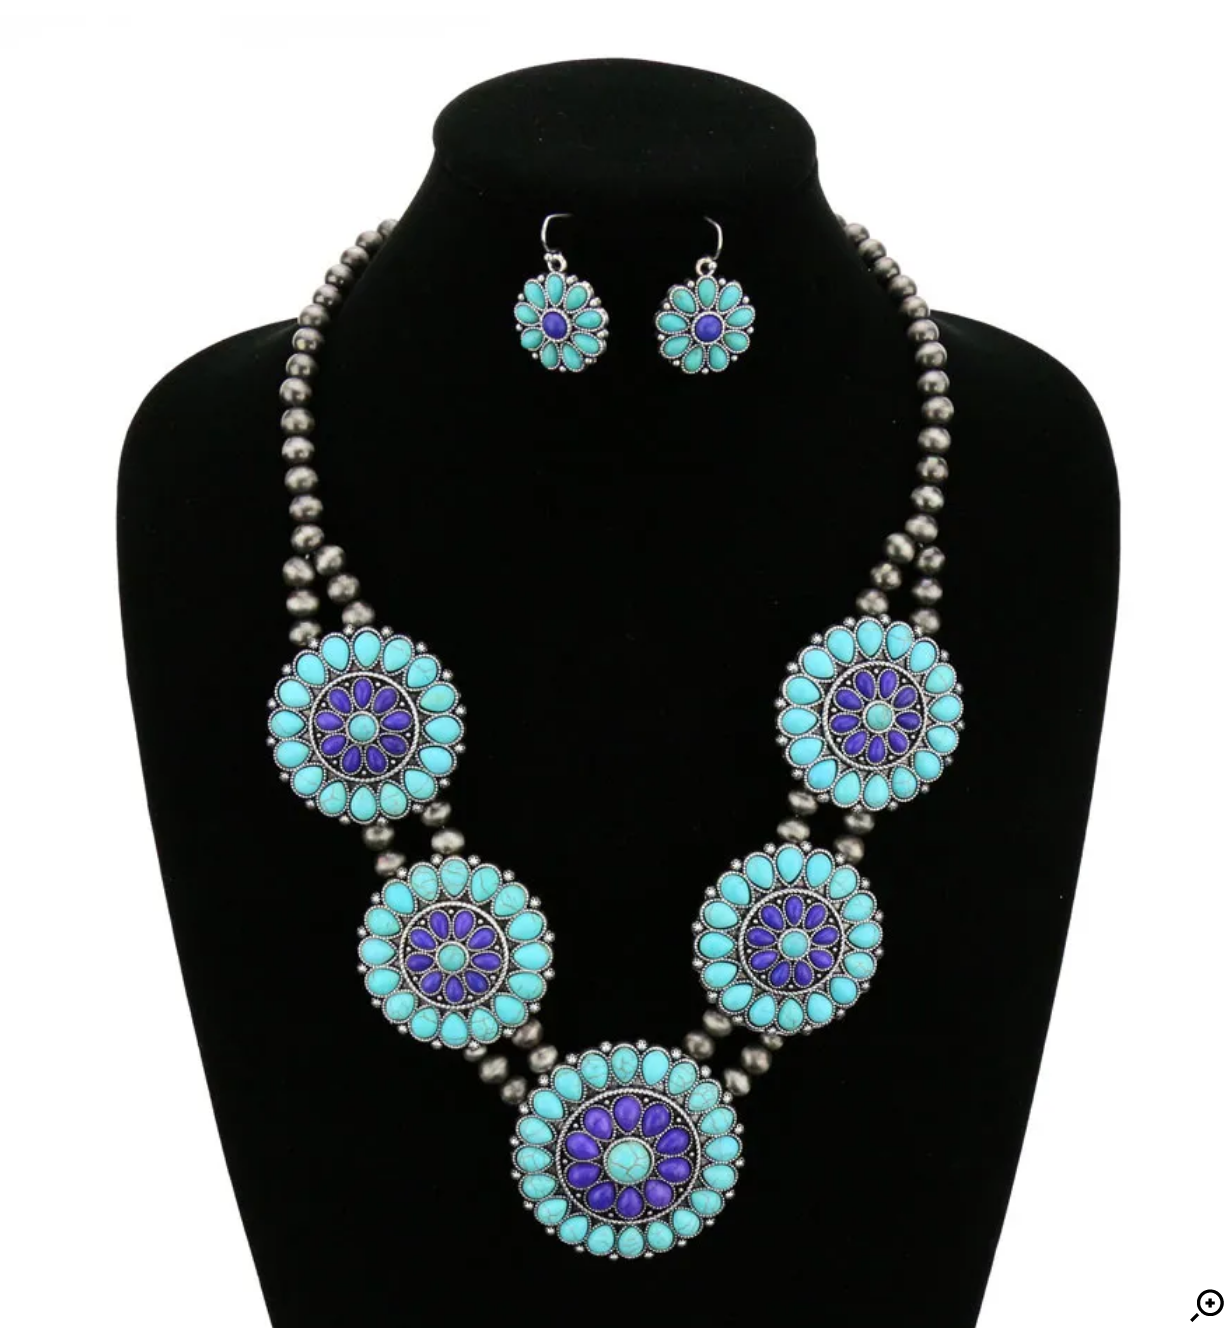 Western Navajo Style Pearl Squash Blossom Necklace Set